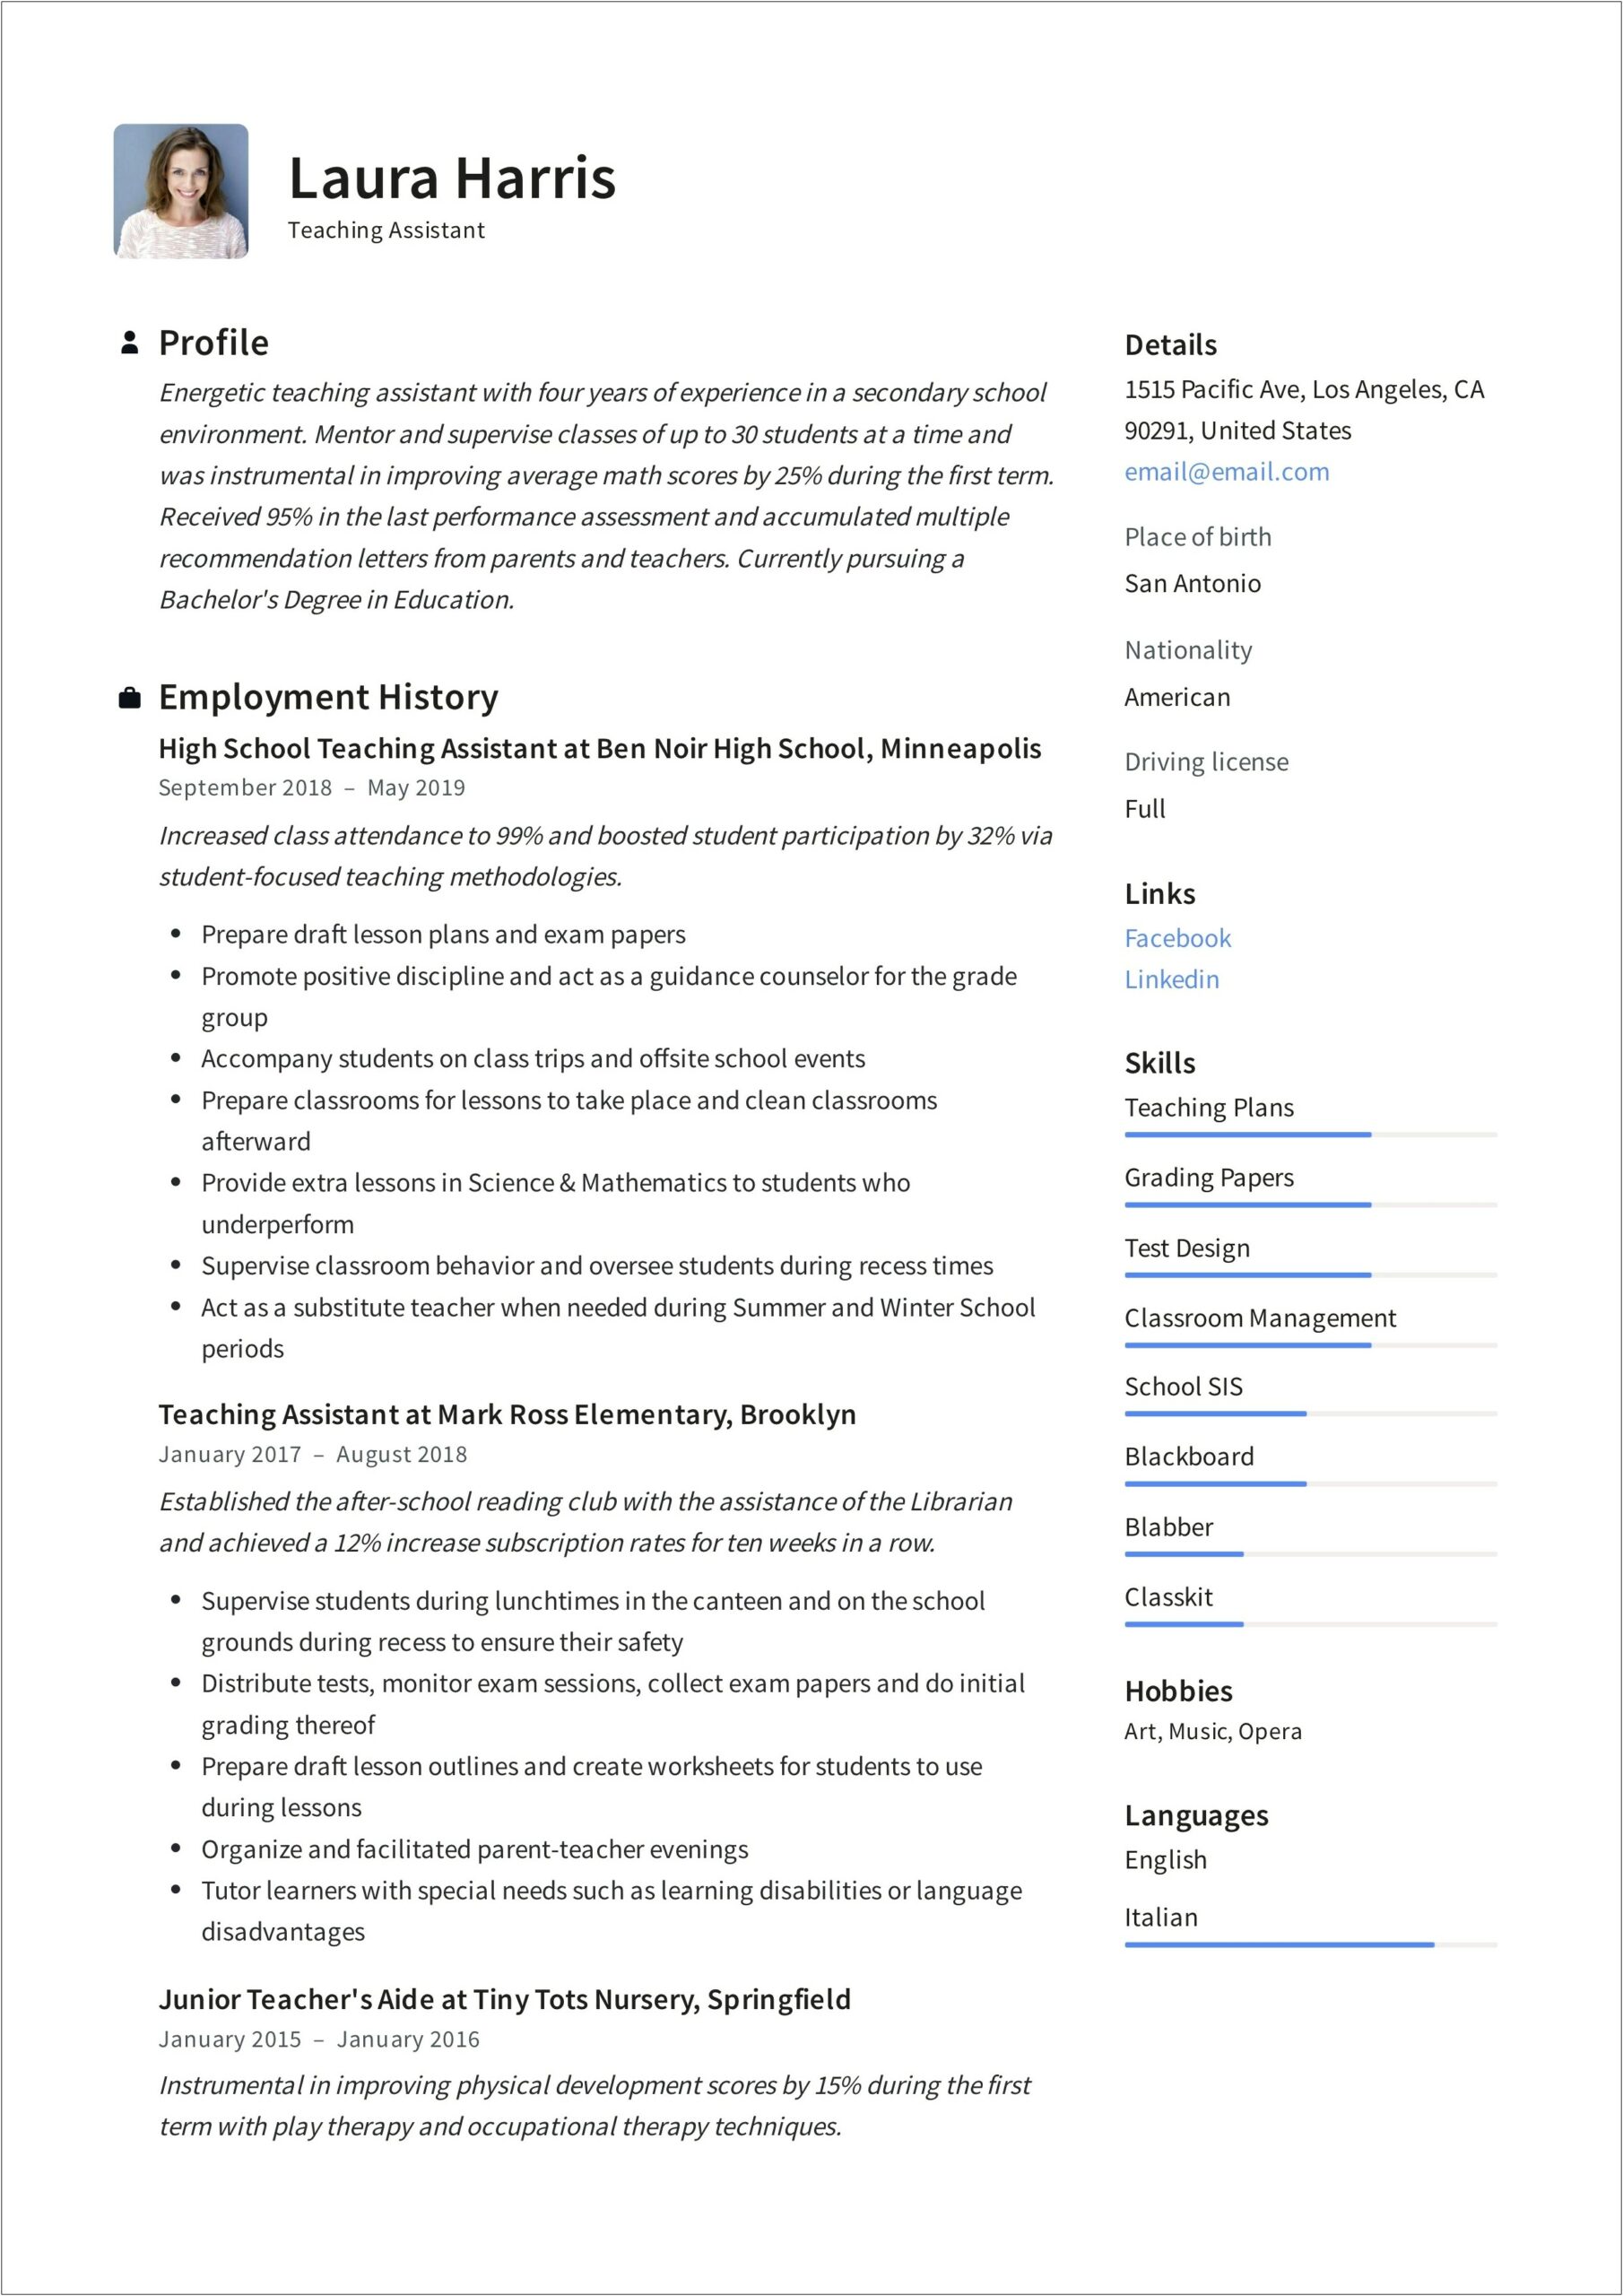 Sample Resume For Paraprofessional Position